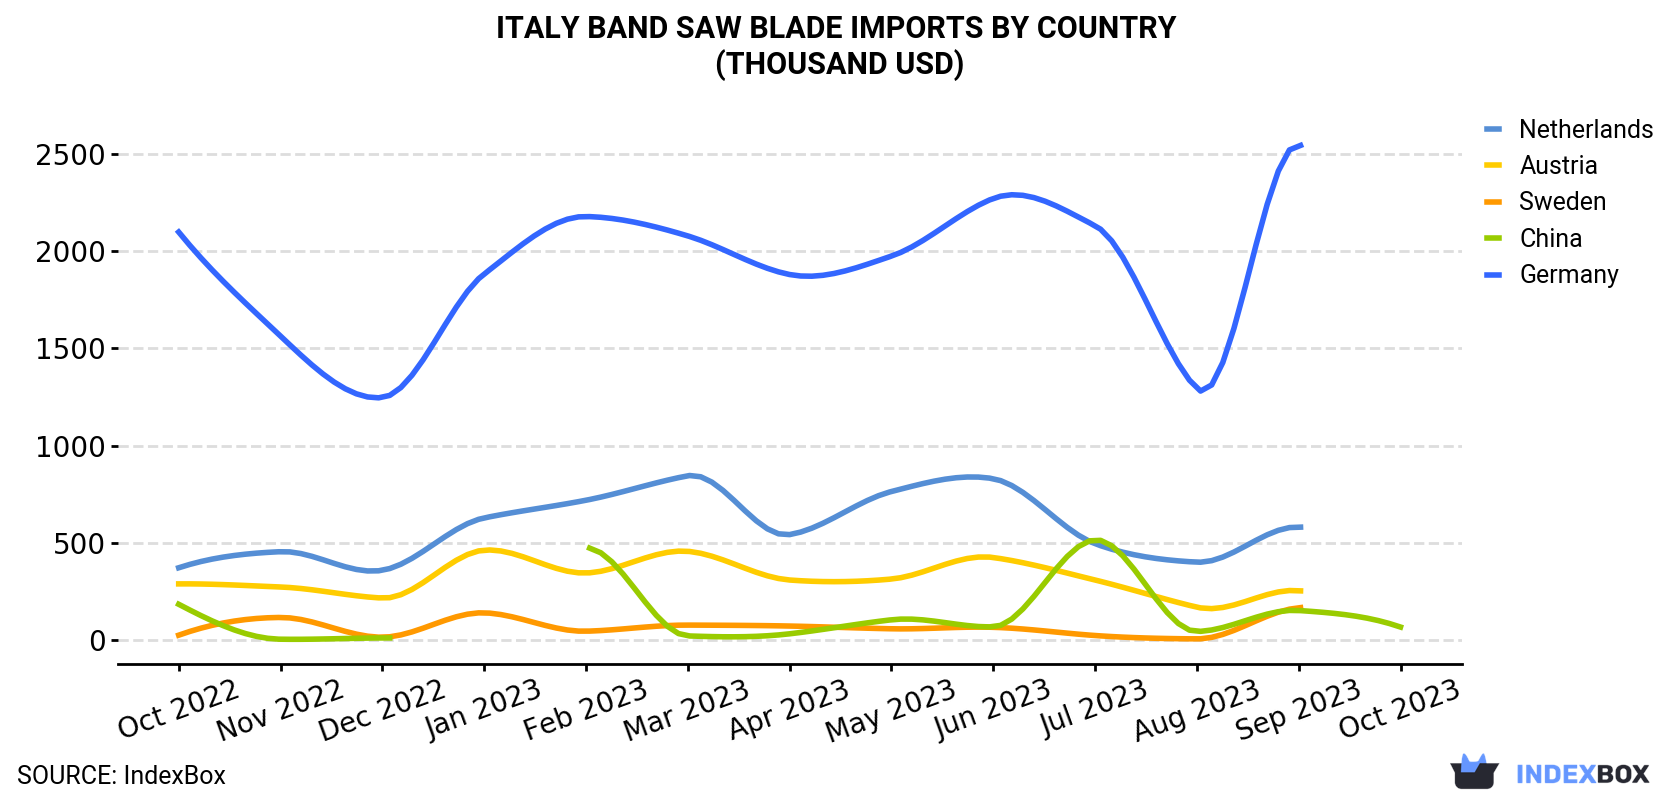 Italy Band Saw Blade Imports By Country (Thousand USD)